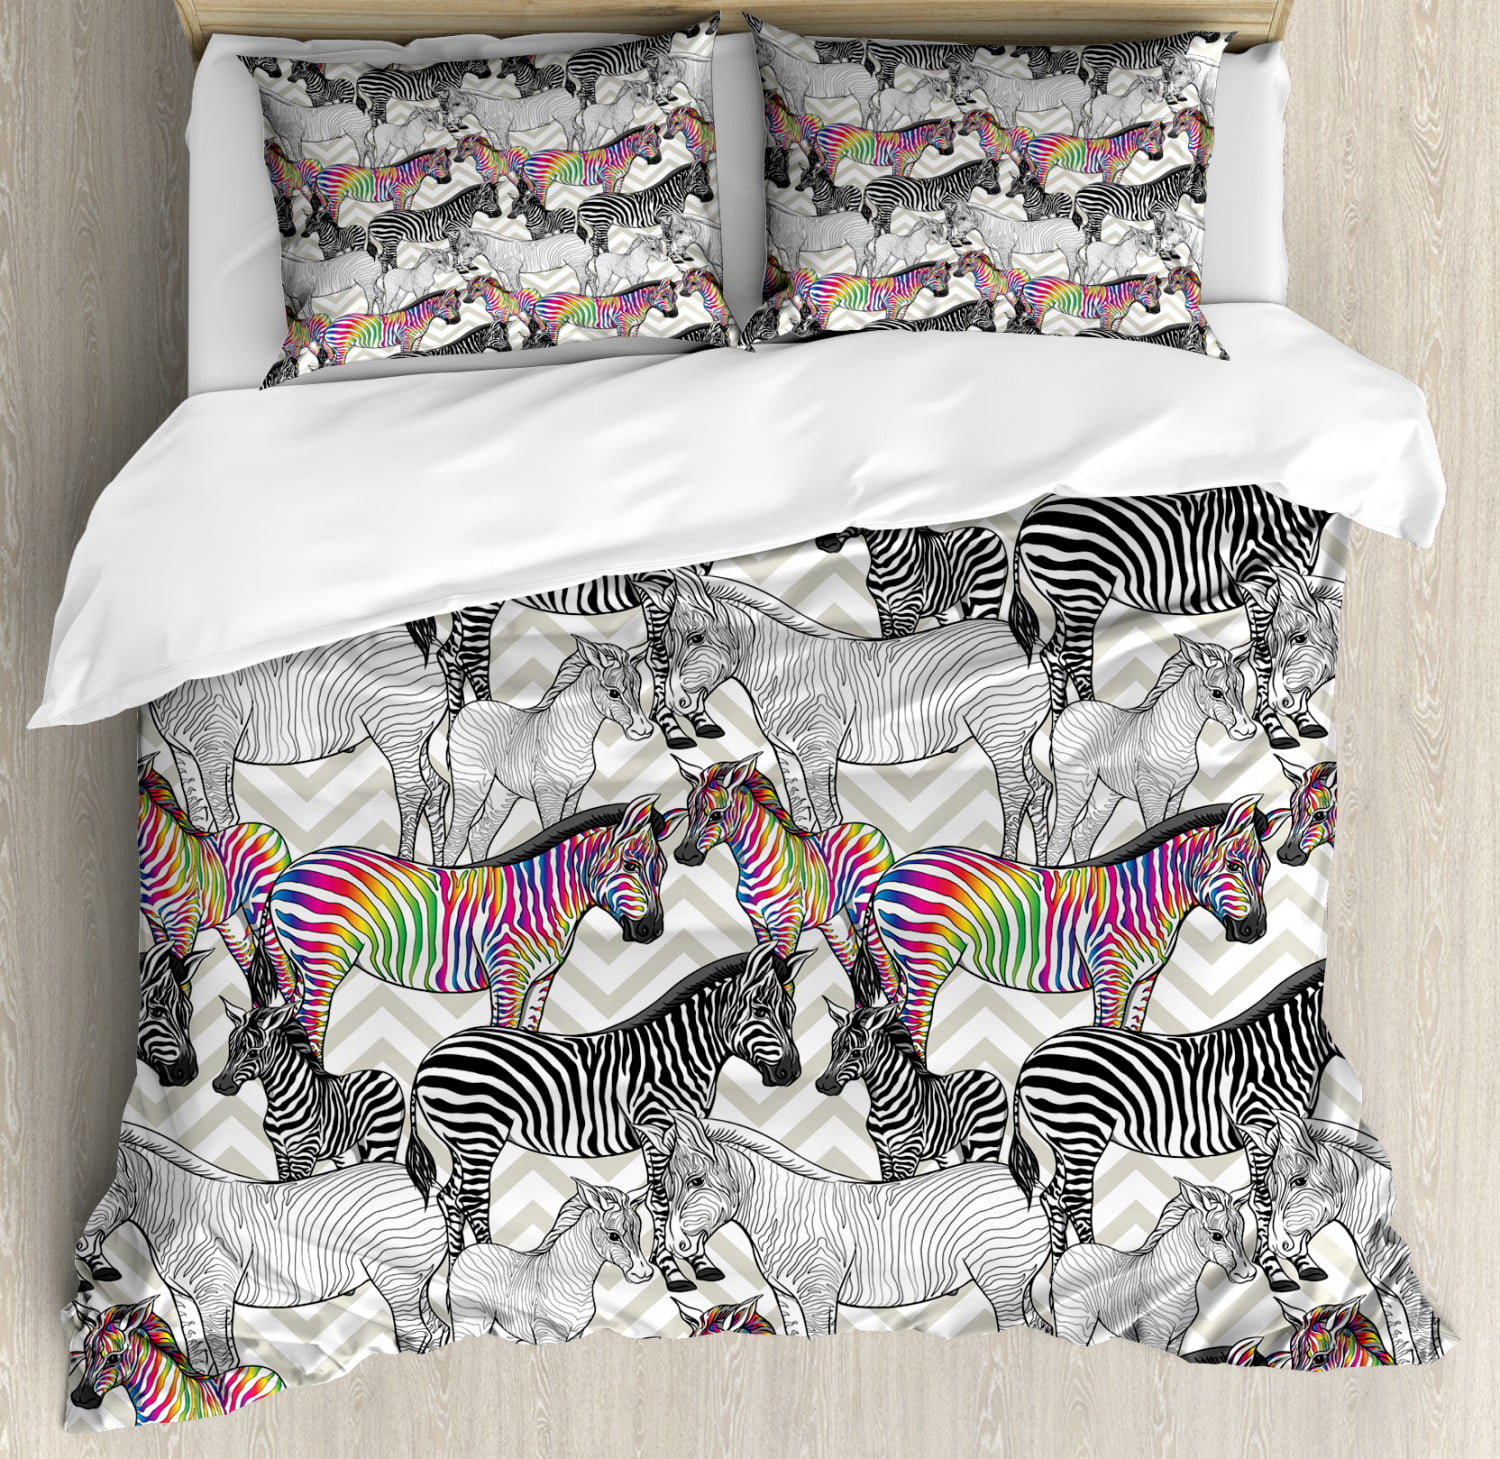 Dragon Quilted Bedspread & Pillow Shams Set Abstract Fiery Creature Print 